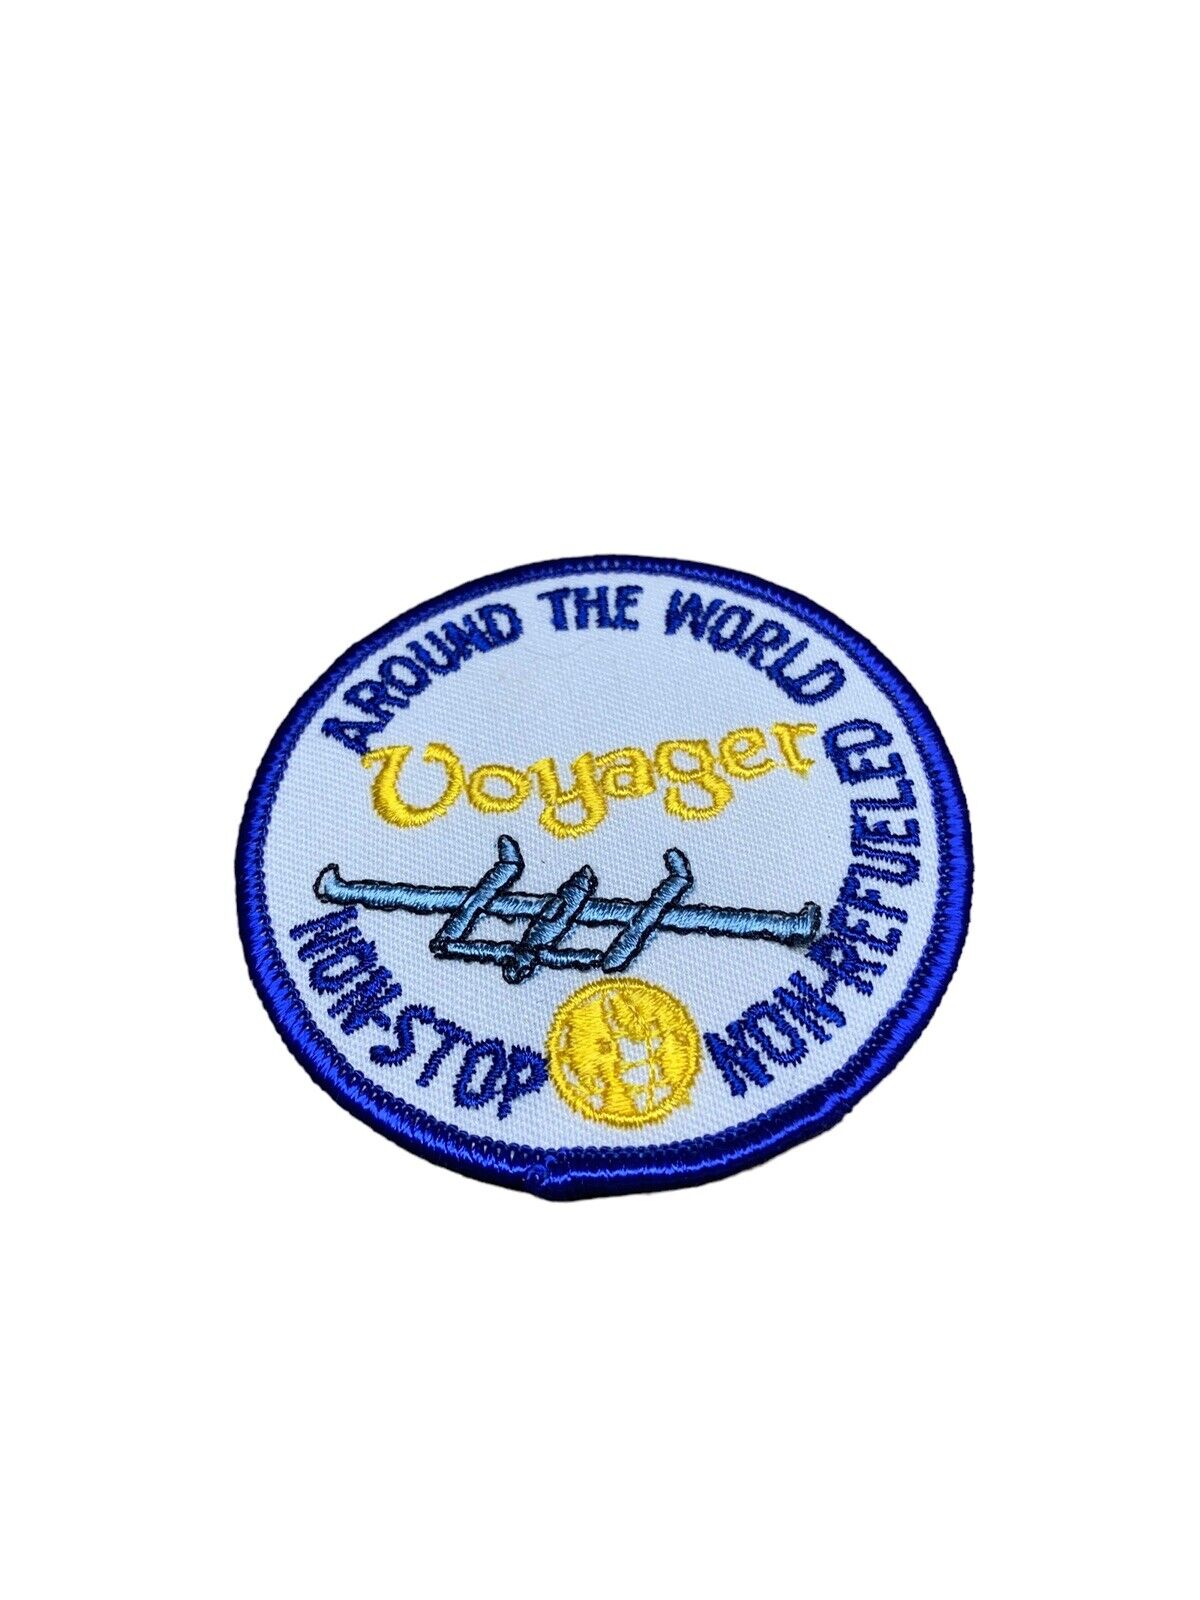 Vtg Voyager Patch Around the World Non-Stop Non-Refueled Pilot Aviation Airplane